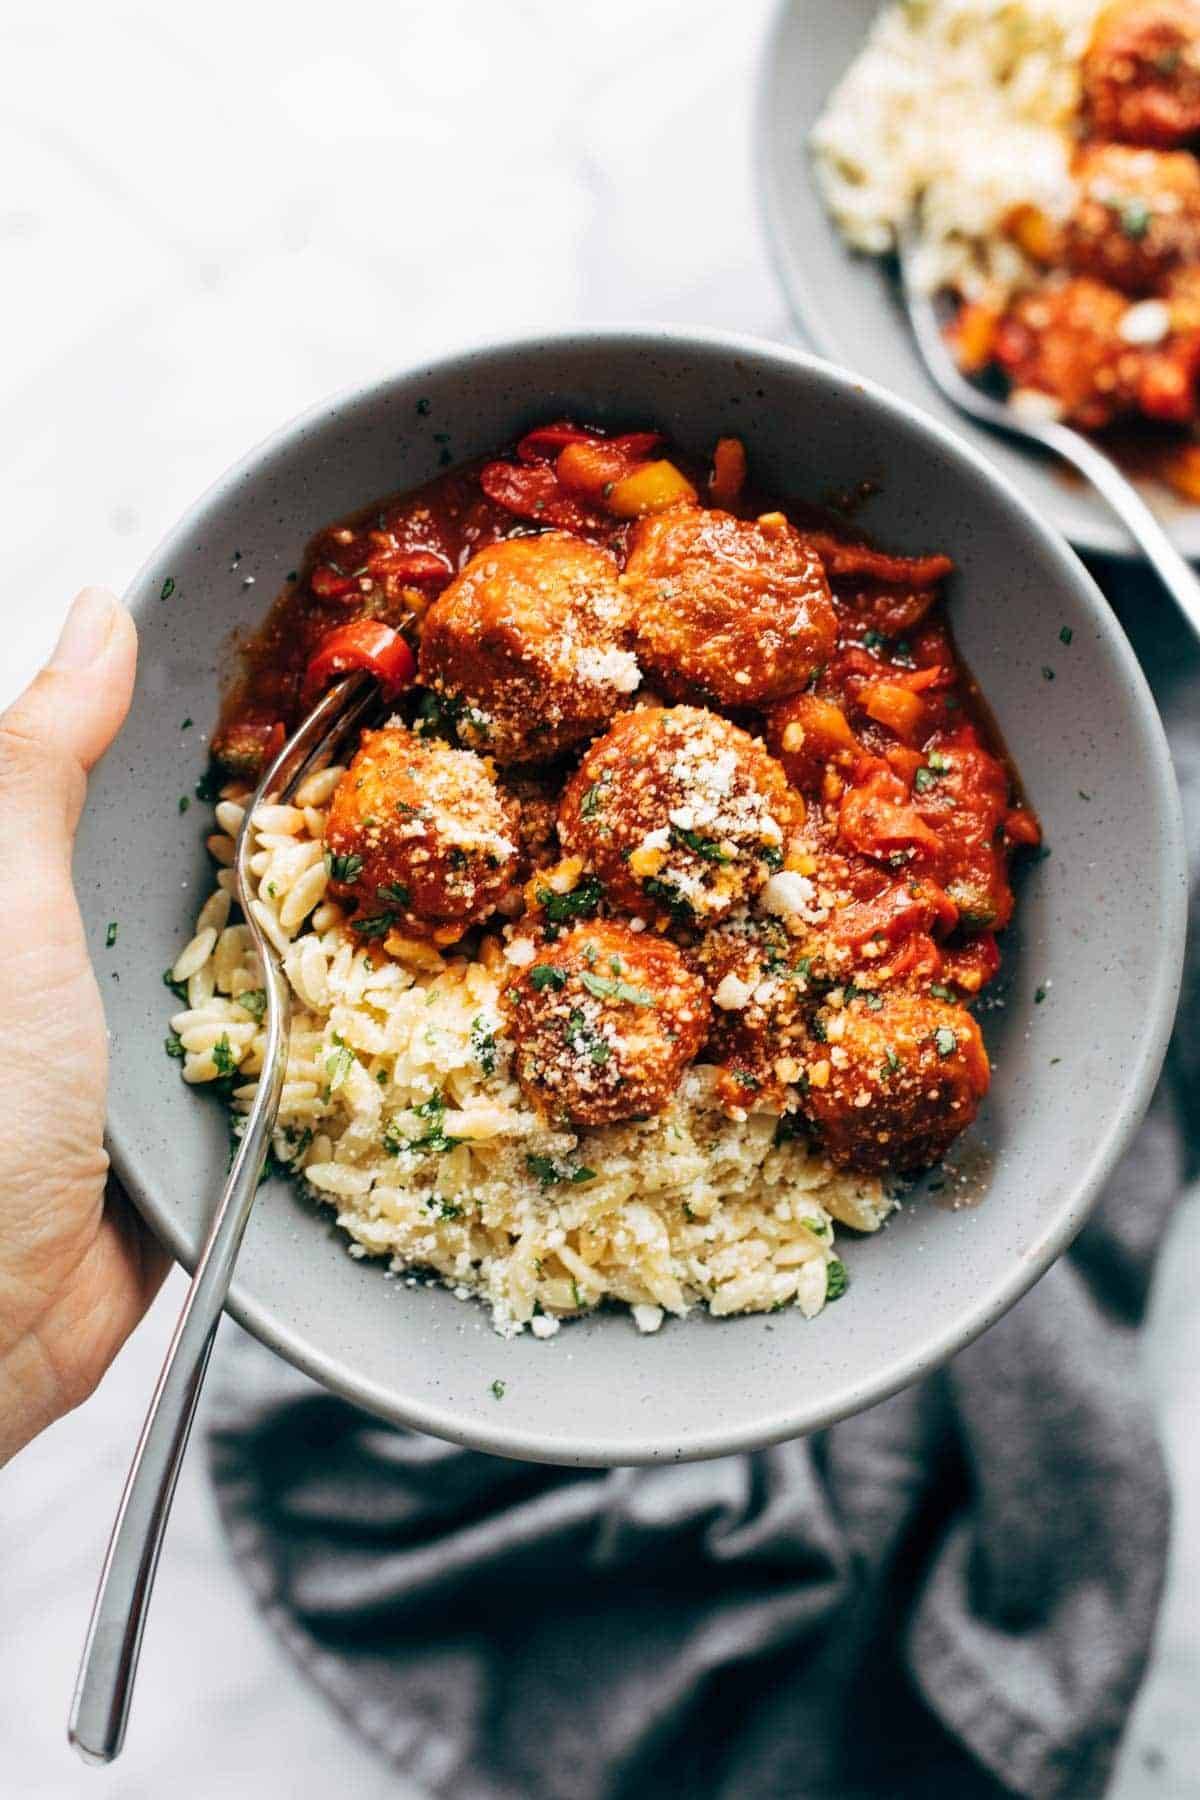 Chicken meatballs with peppers and orzo in a bowl.